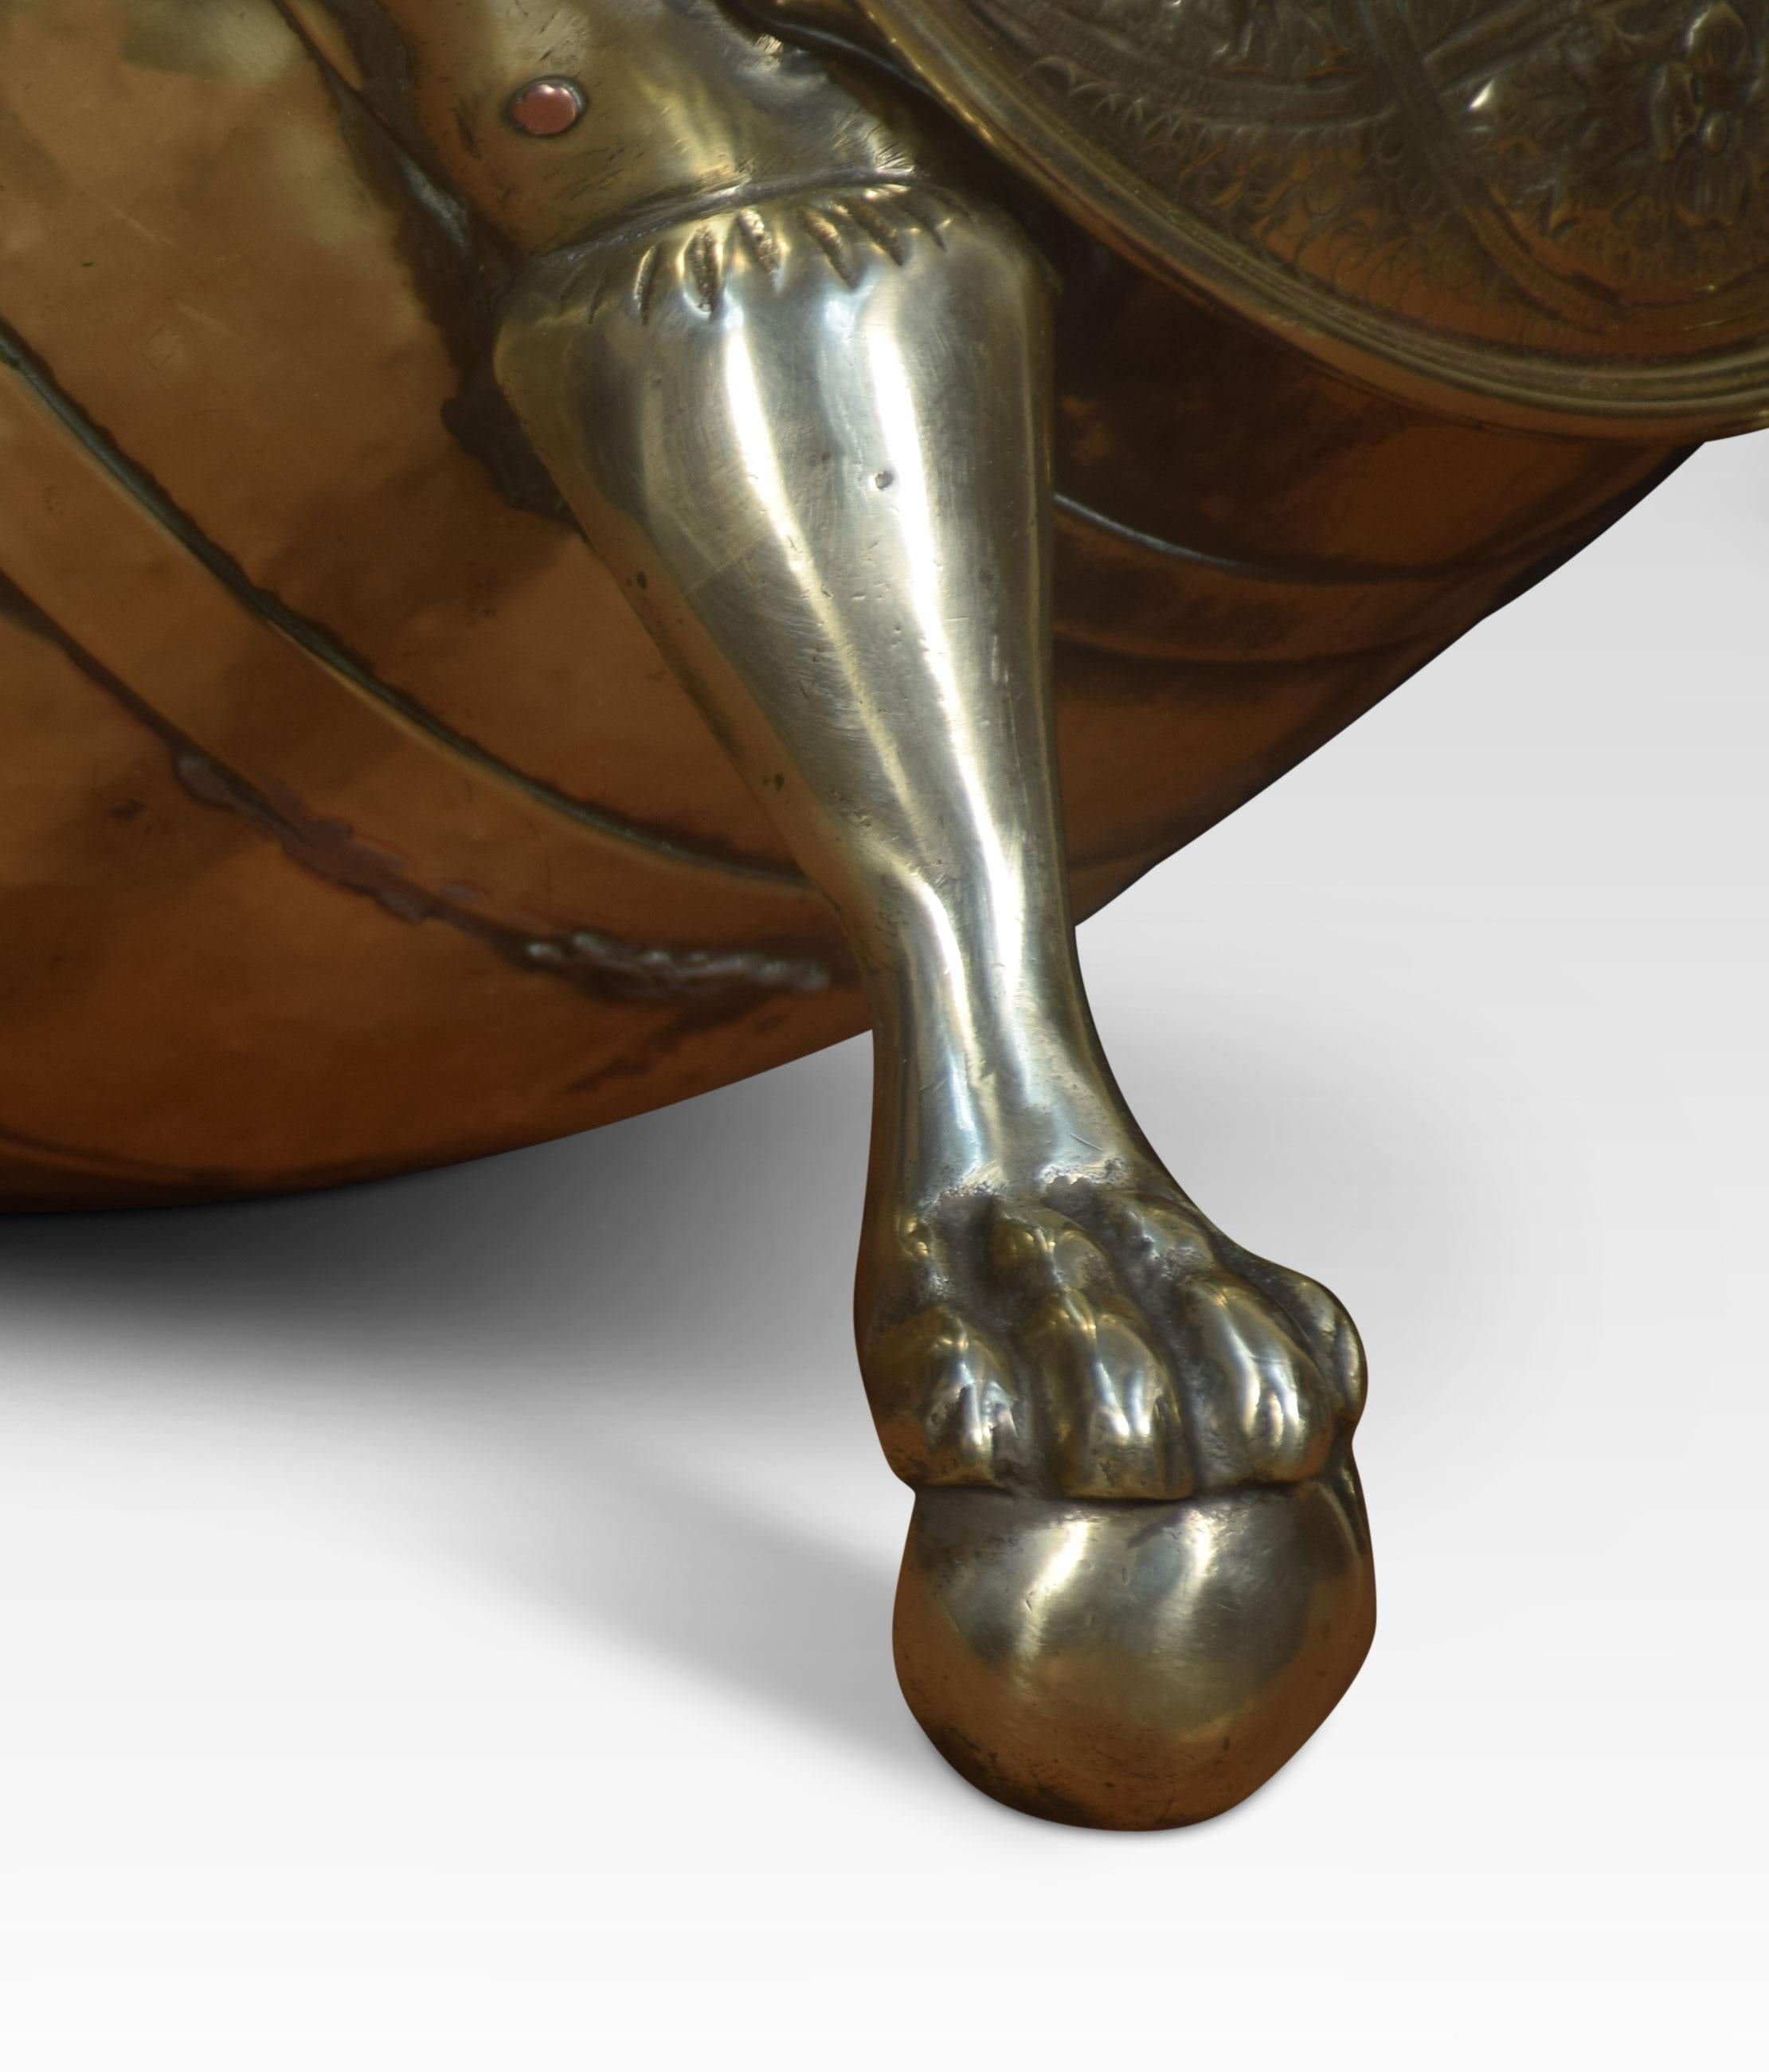 Brass coal bin with armorial lid decoration resting on ball and claw feet.
Dimensions:
Height 16 inches
Width 16 inches
Depth 12 inches.